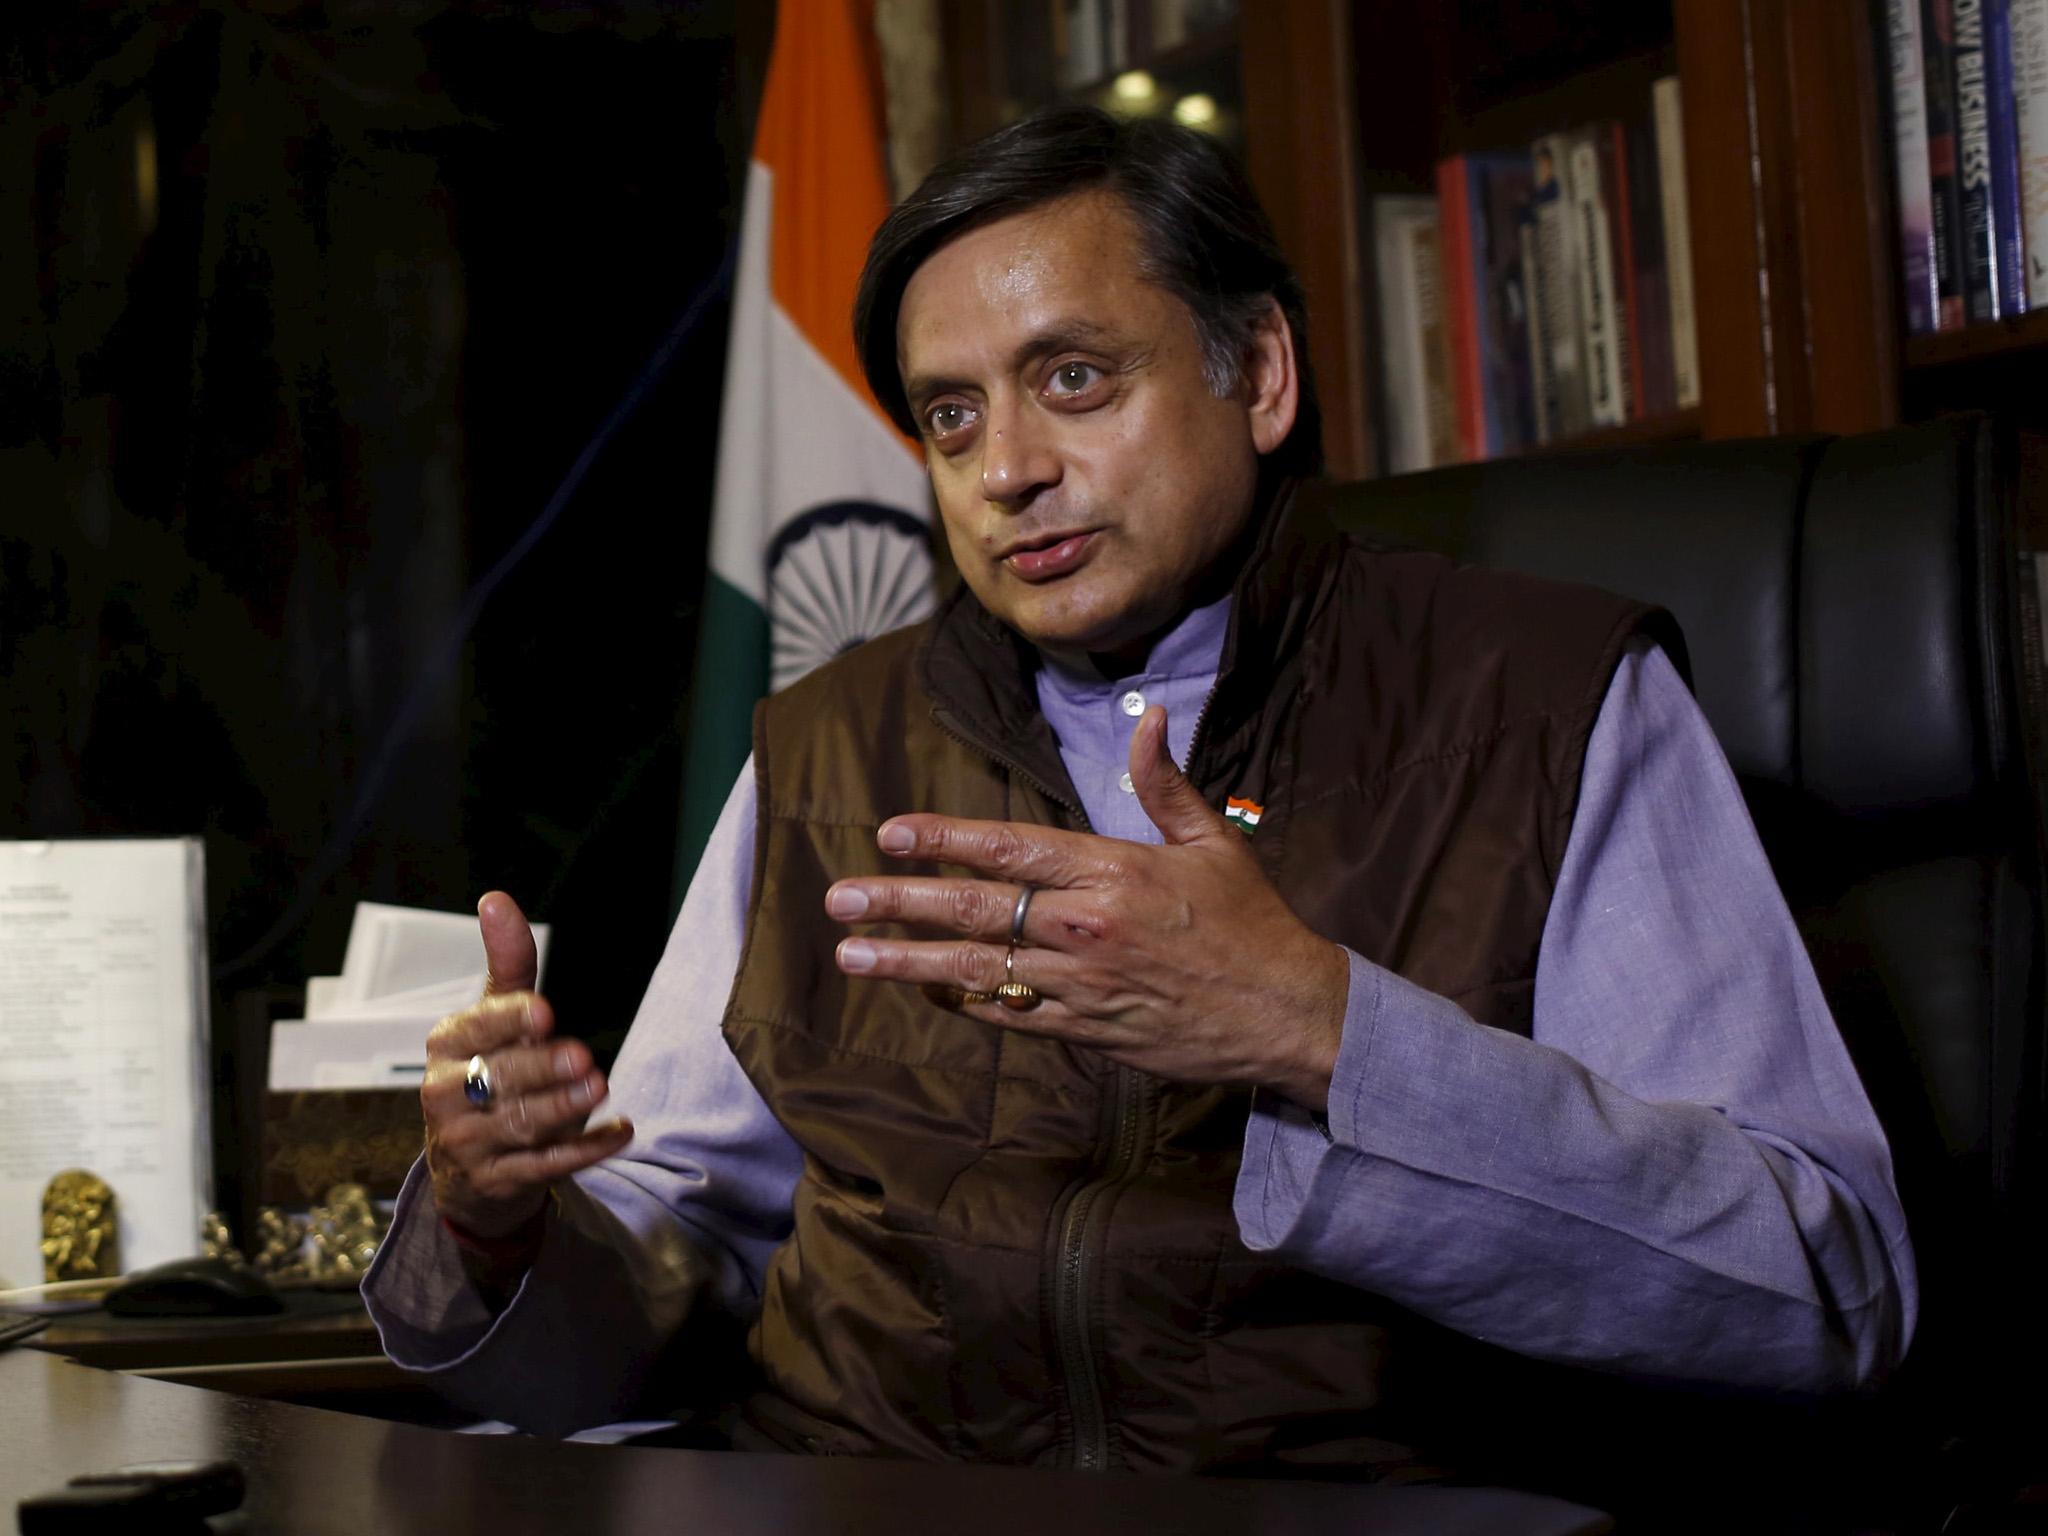 Dr Tharoor first rose to prominence after his heartfelt speech at Oxford Union, discussing the economic toll British rule took on India, in July 2015 went viral